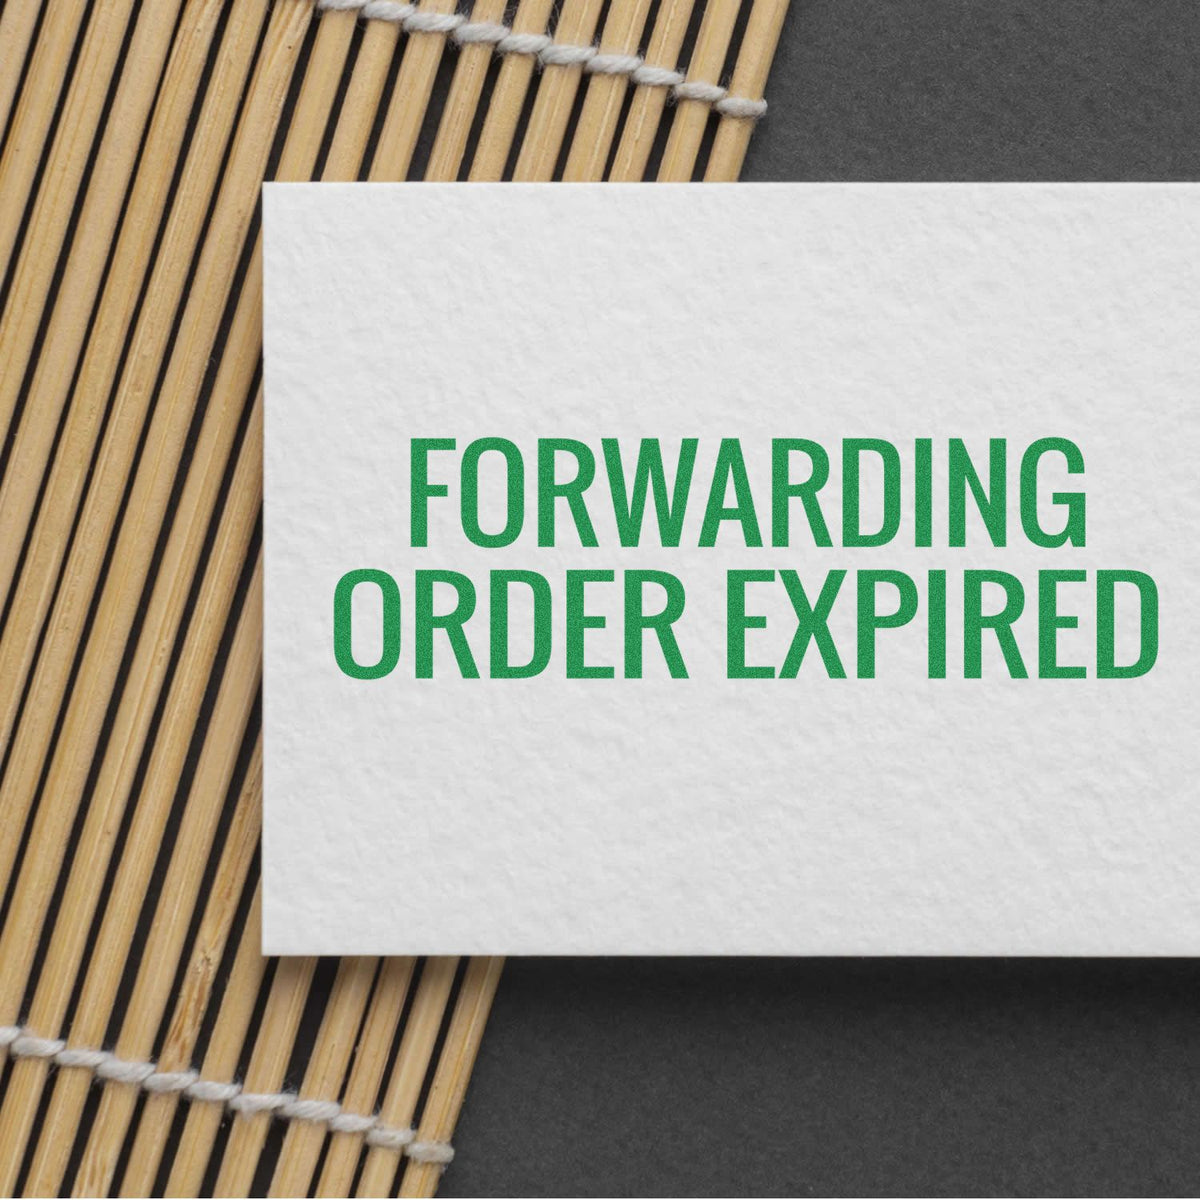 Large Forwarding Order Expiring Rubber Stamp In Use